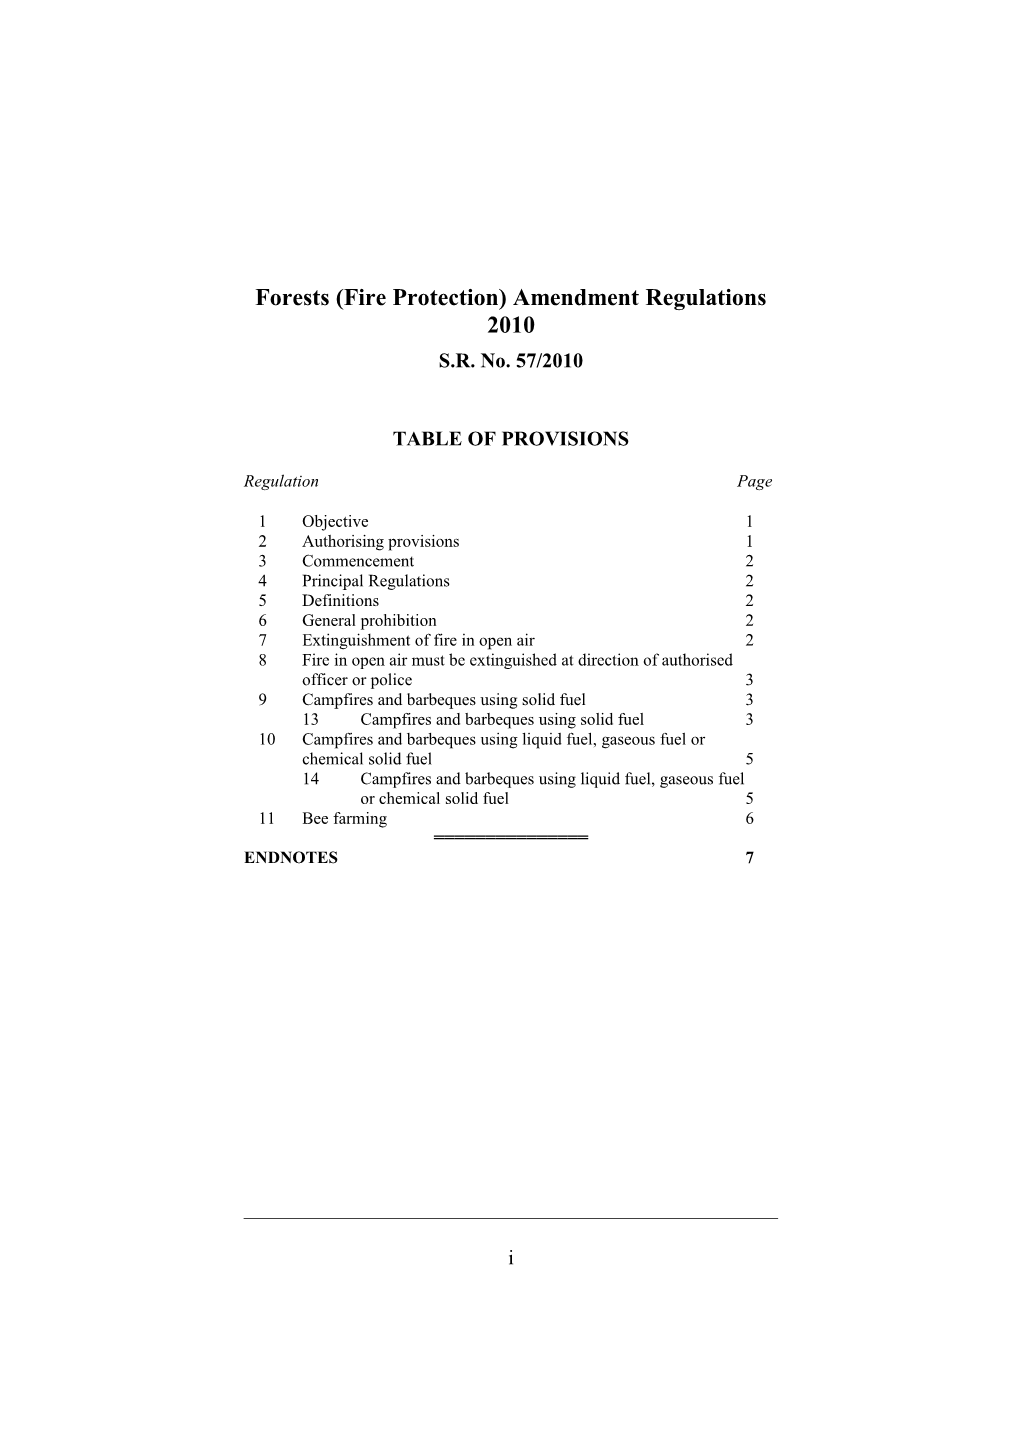 Forests (Fire Protection) Amendment Regulations 2010